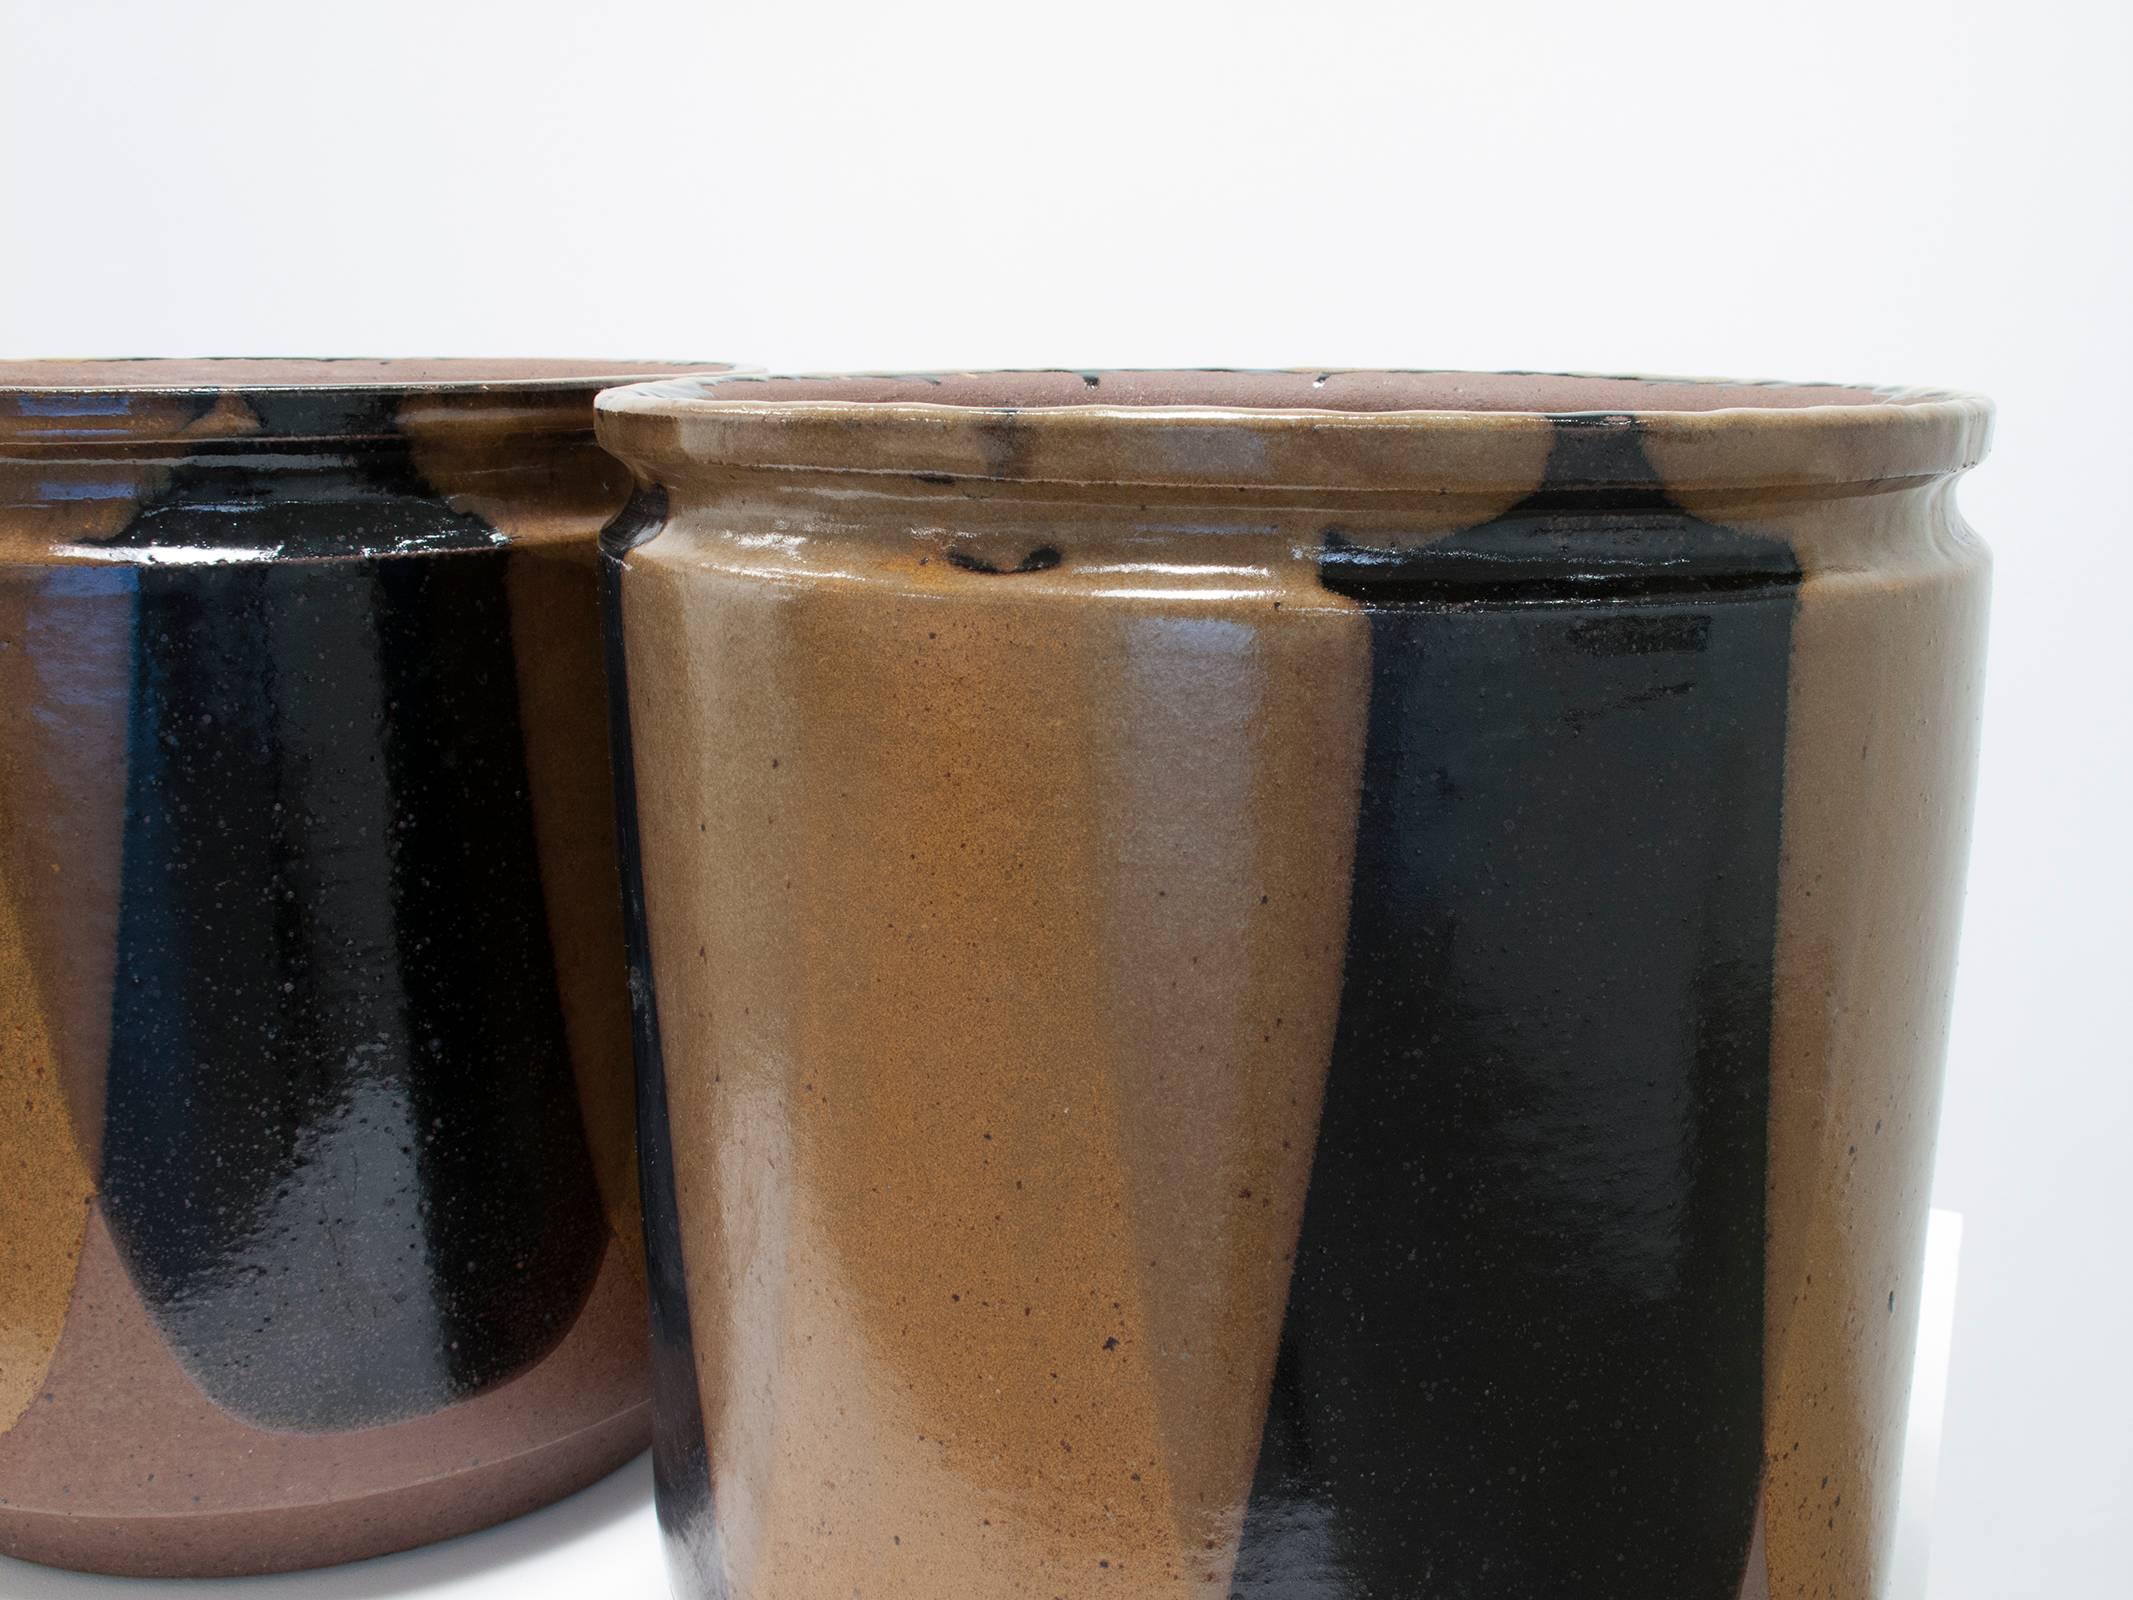 American David Cressey and Robert Maxwell 'Flame' Glaze Design Ceramic Planters, 1970s For Sale